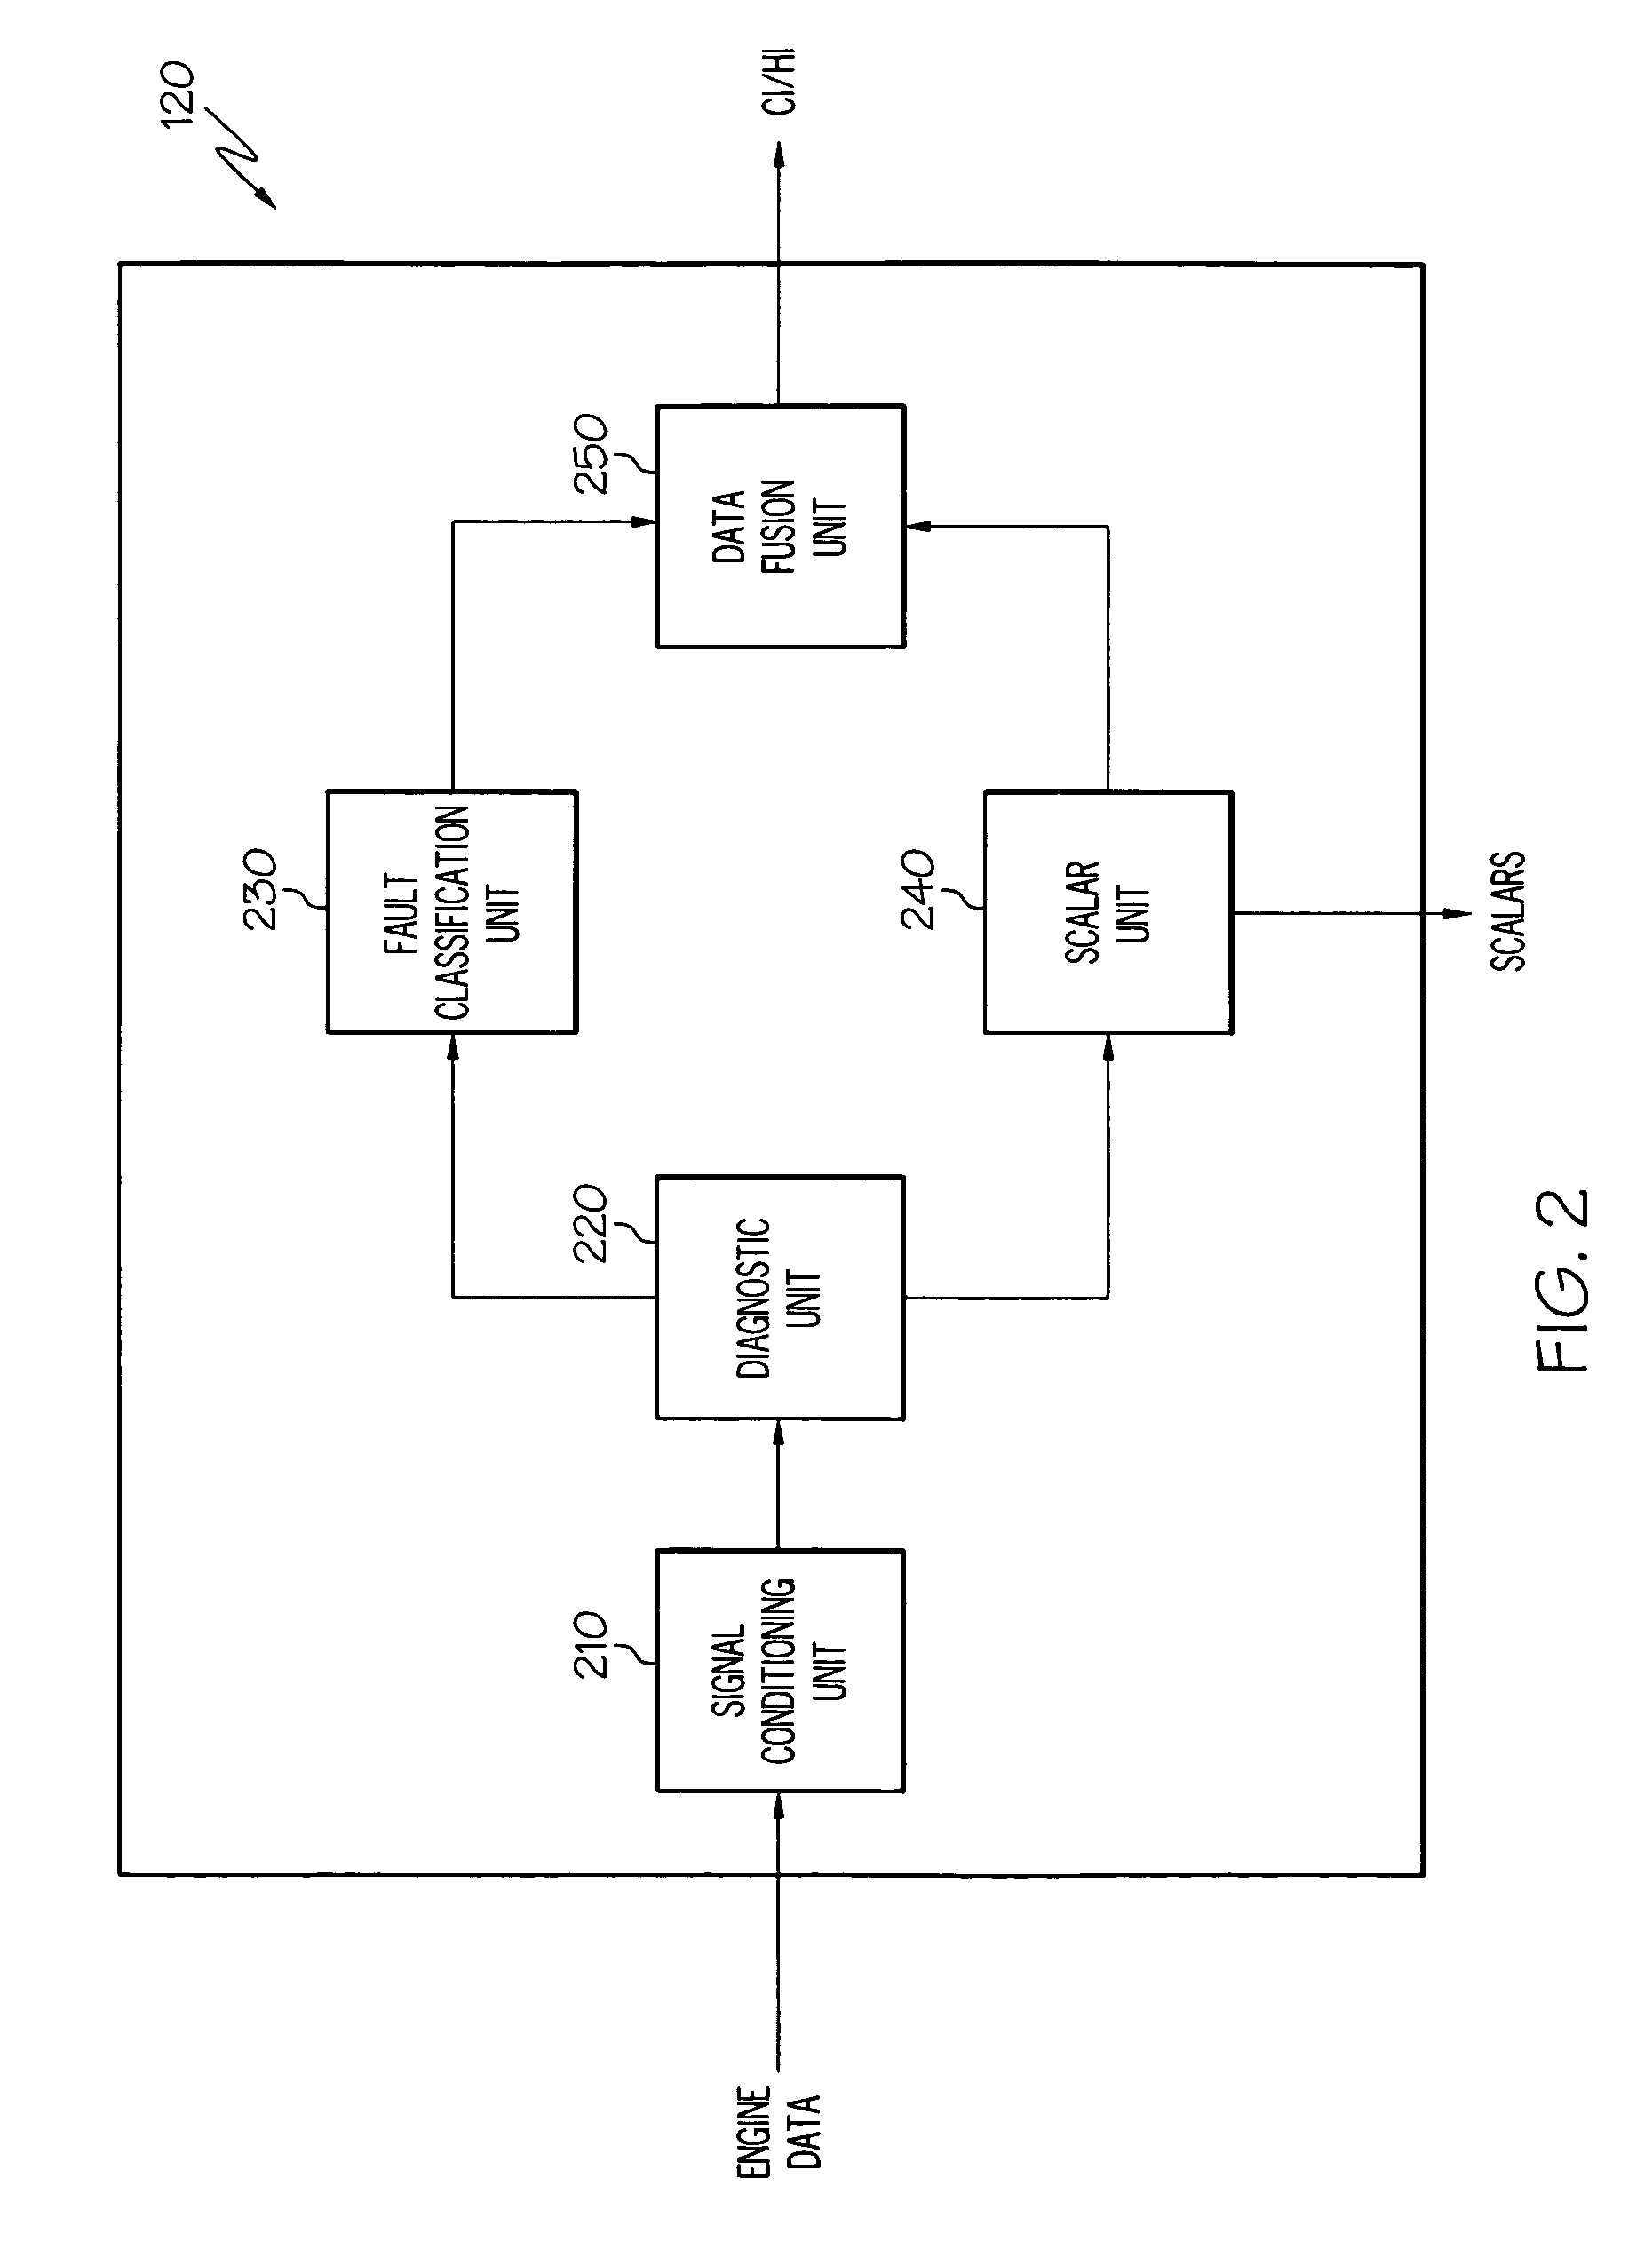 Operations support systems and methods with model-based torque estimates